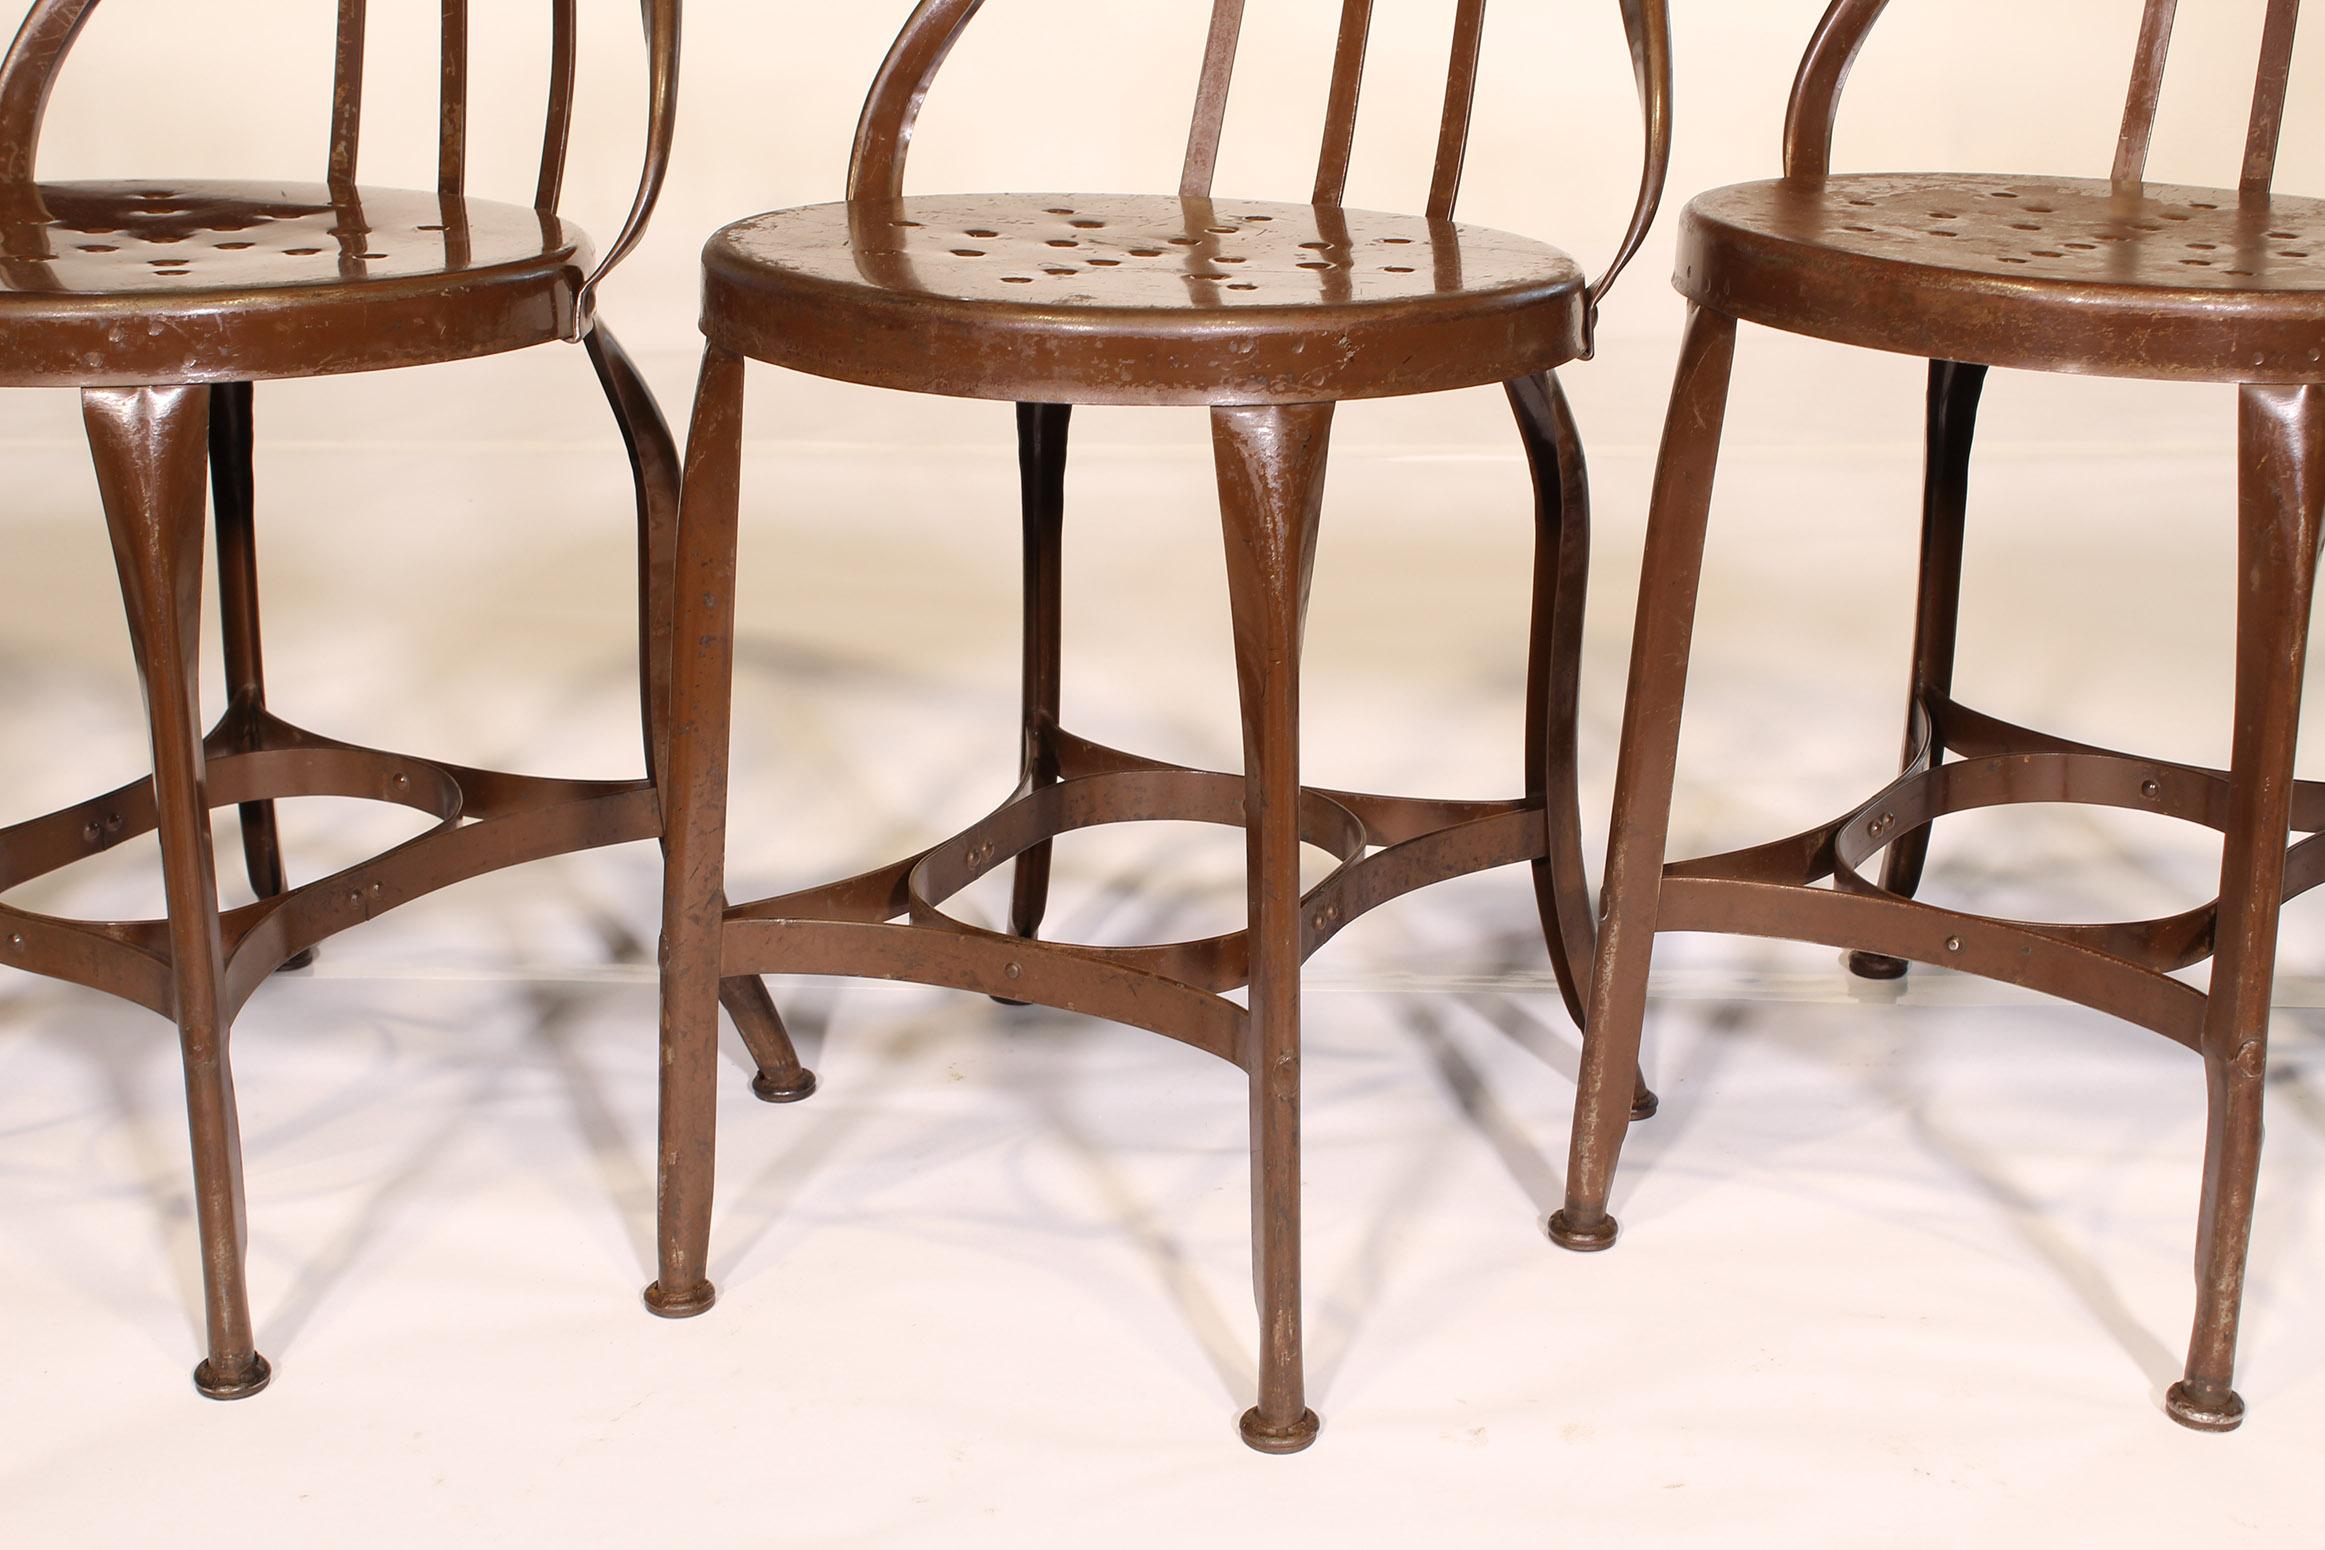 Set of 5 Antique Metal Cafe Chairs by Toledo 2